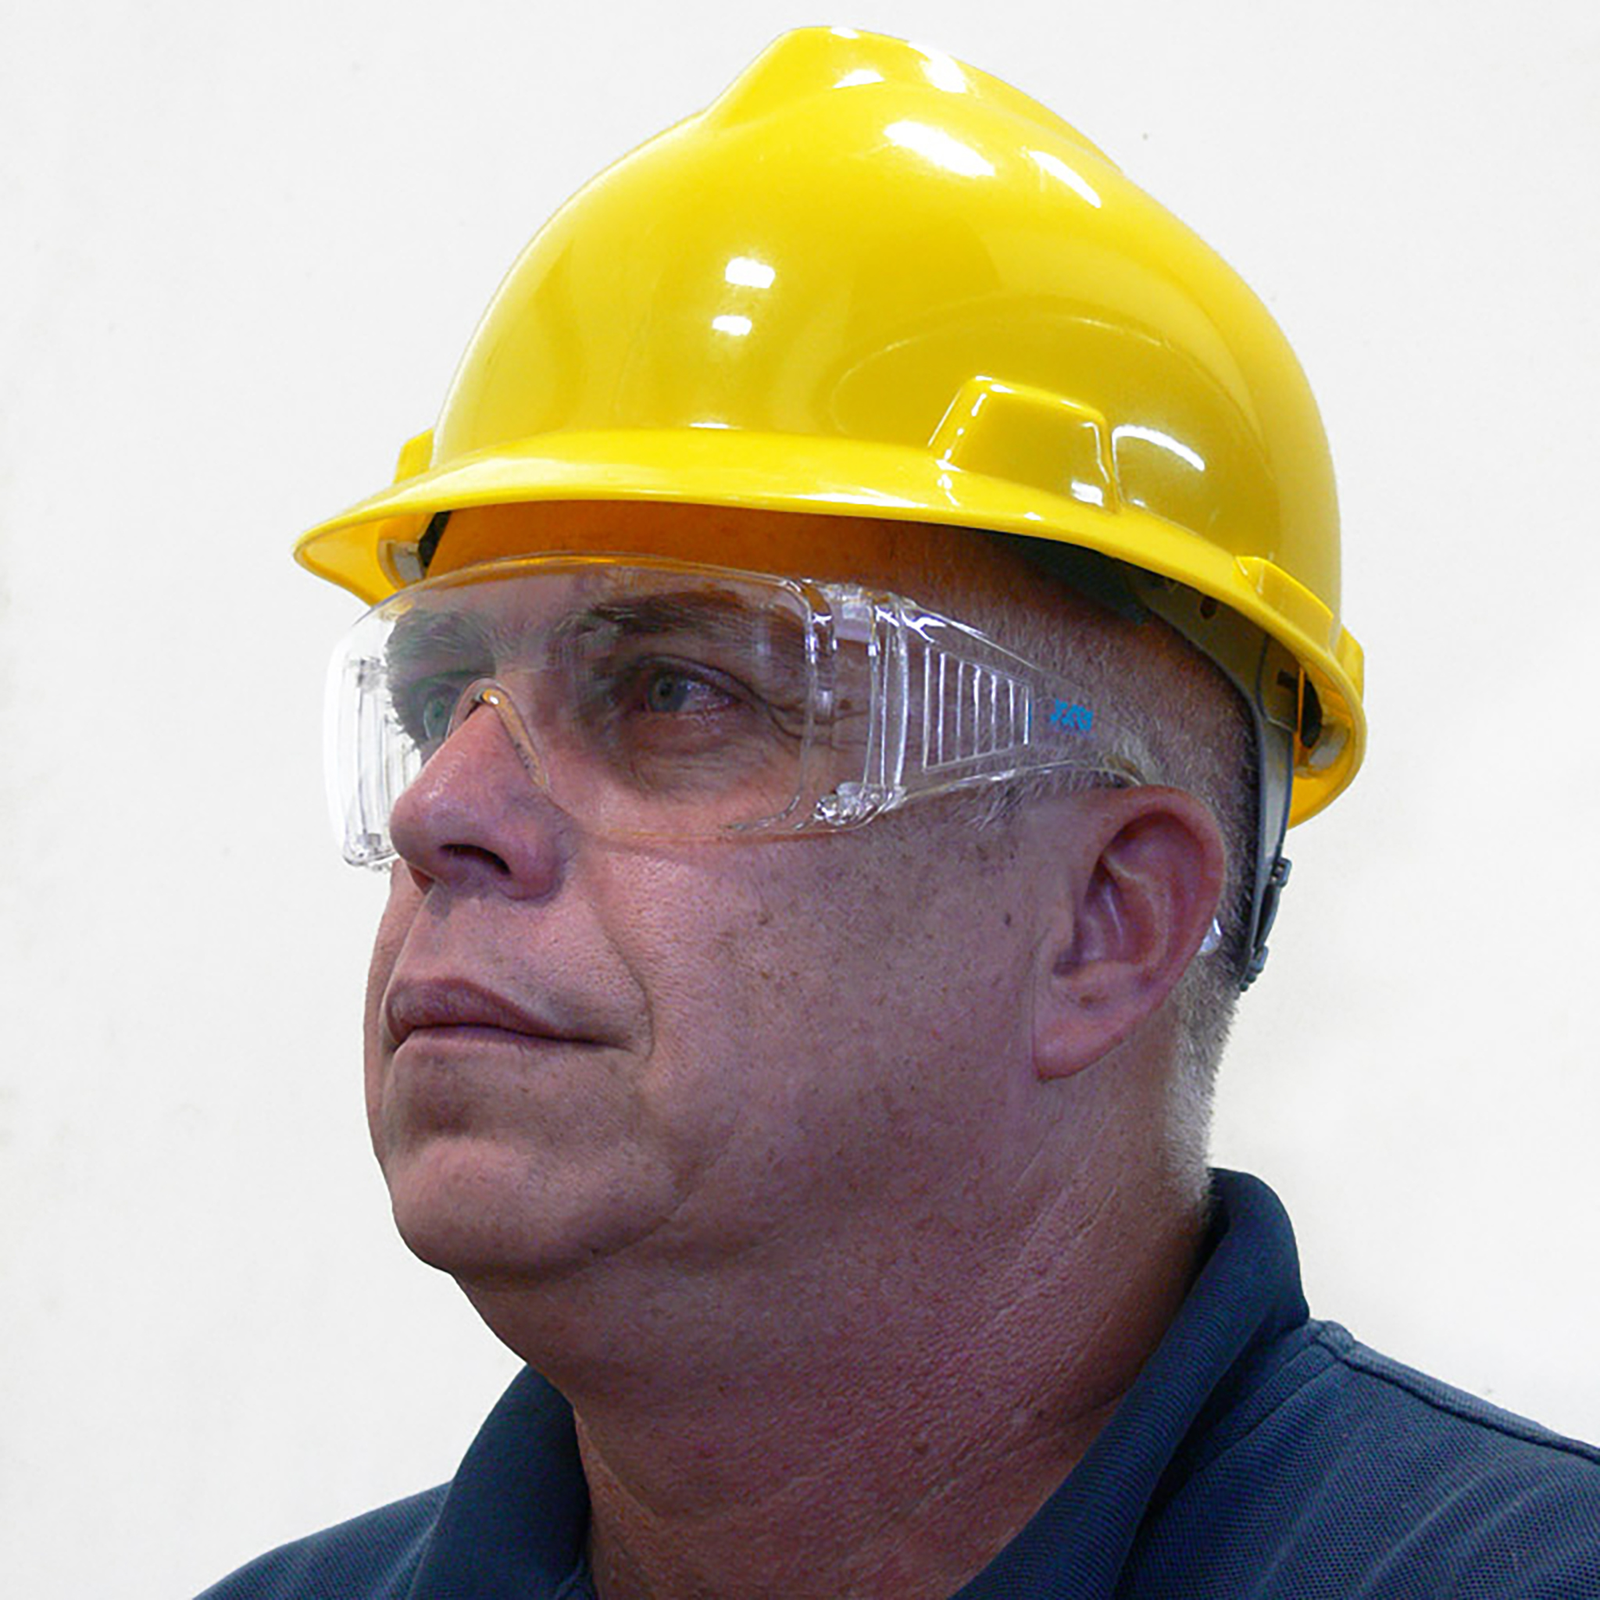 A man wearing a hard hat and the clear safety overglasses for high impact protection